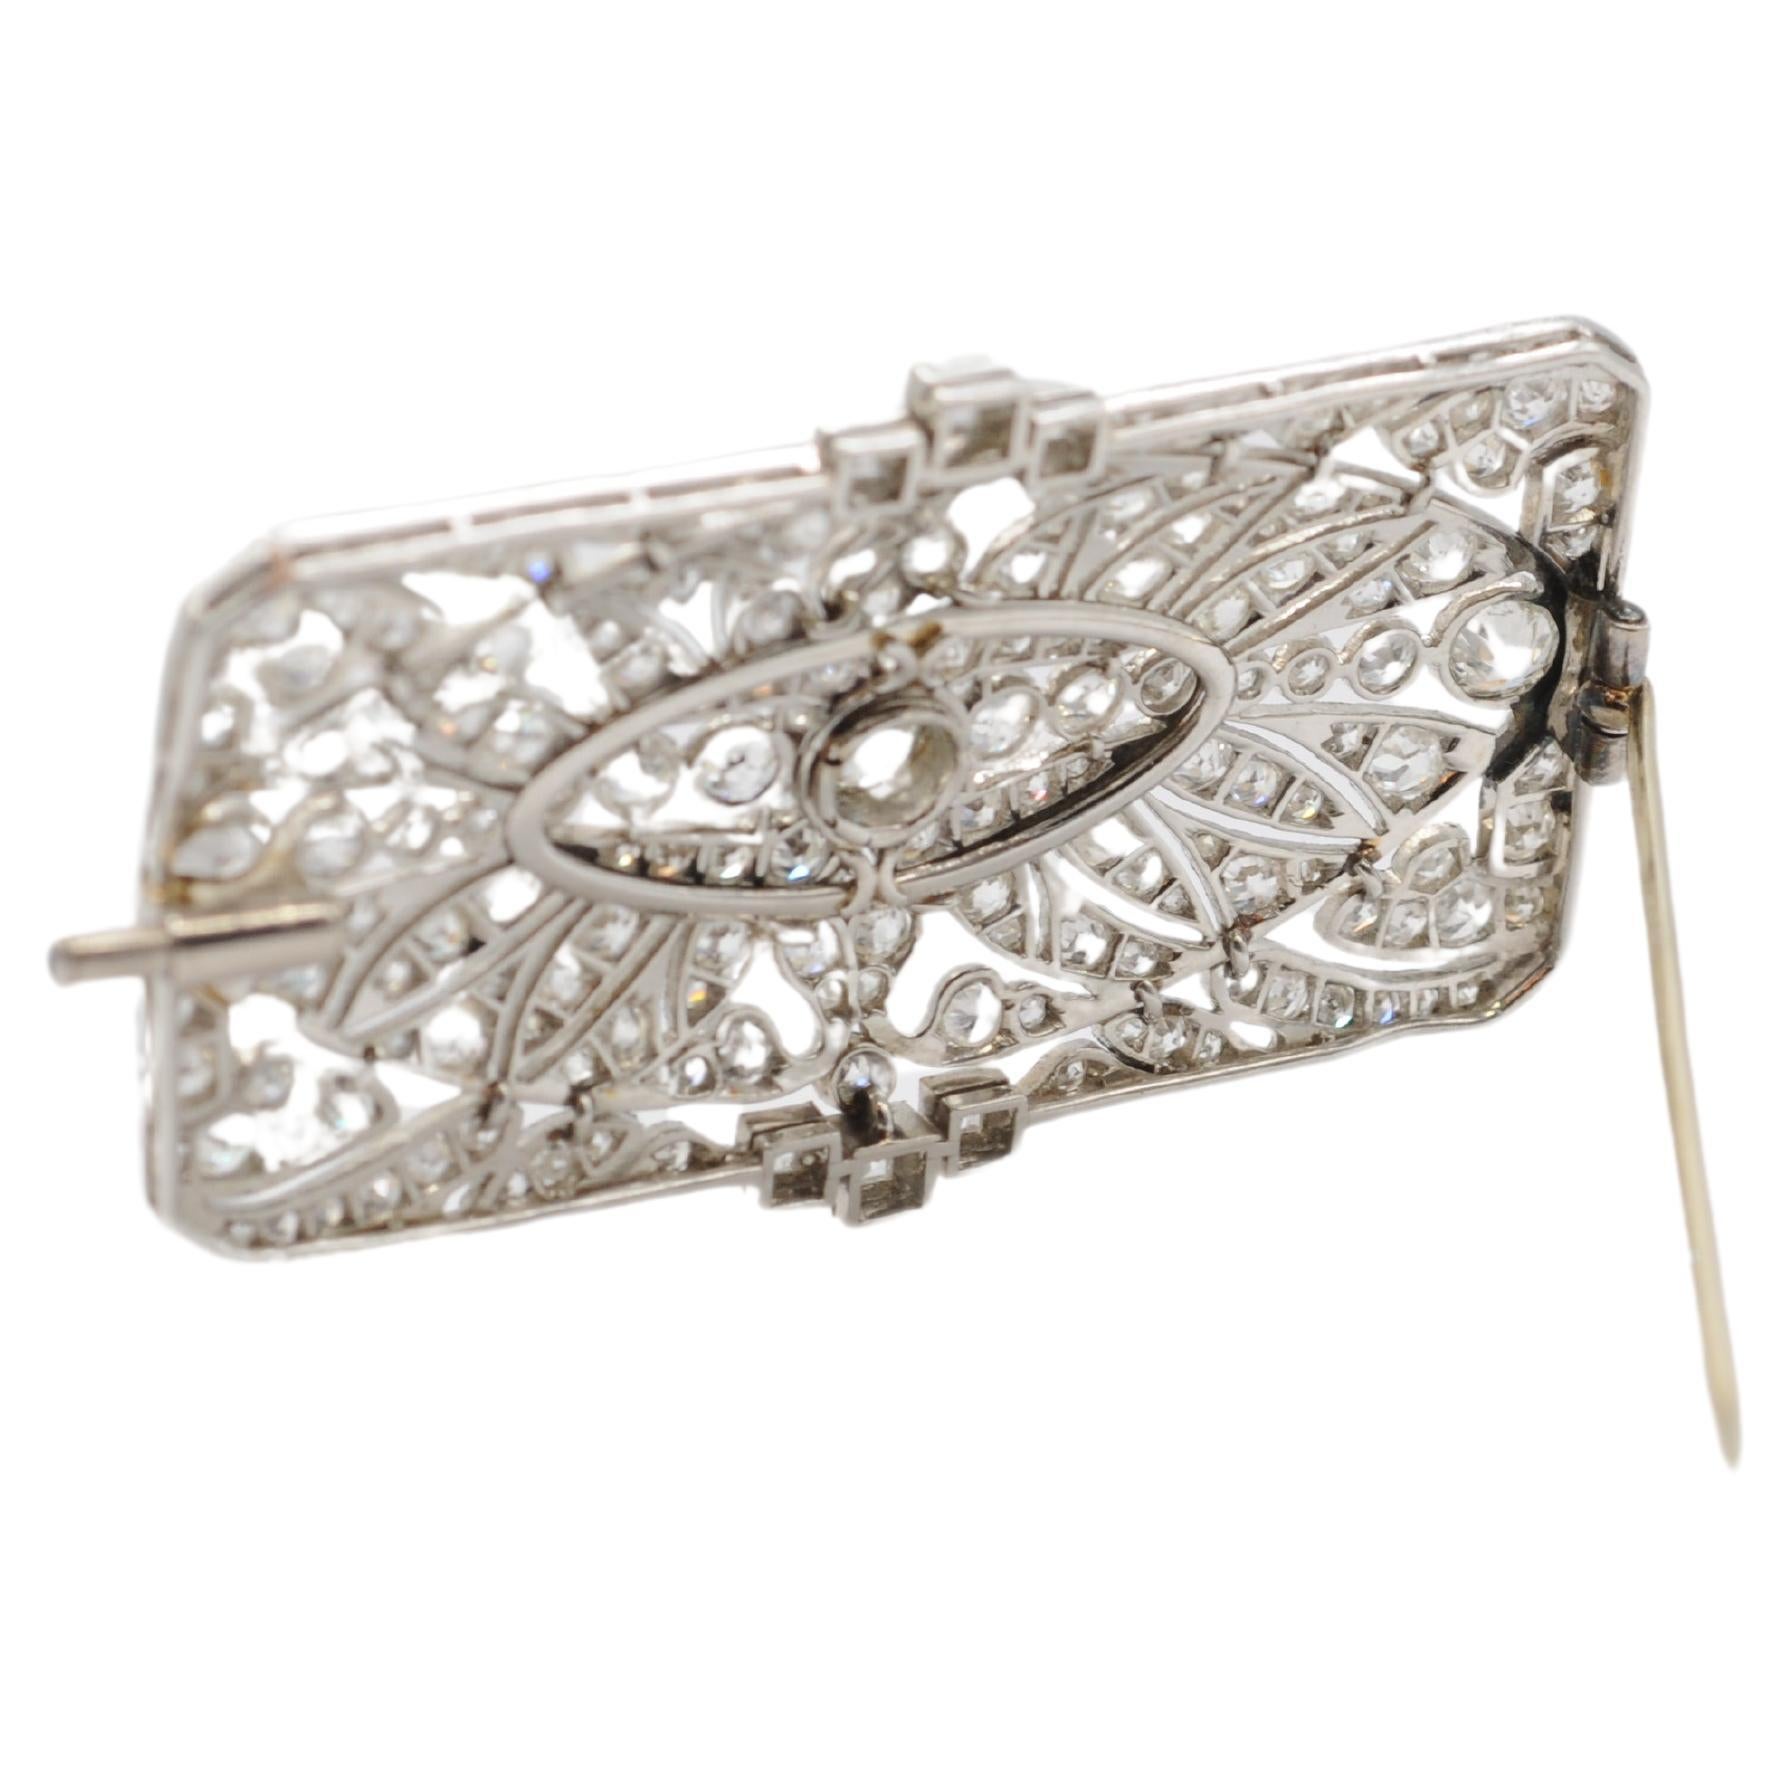 Art deco brooch with 170 diamonds in Old European cut noble platinum  For Sale 1